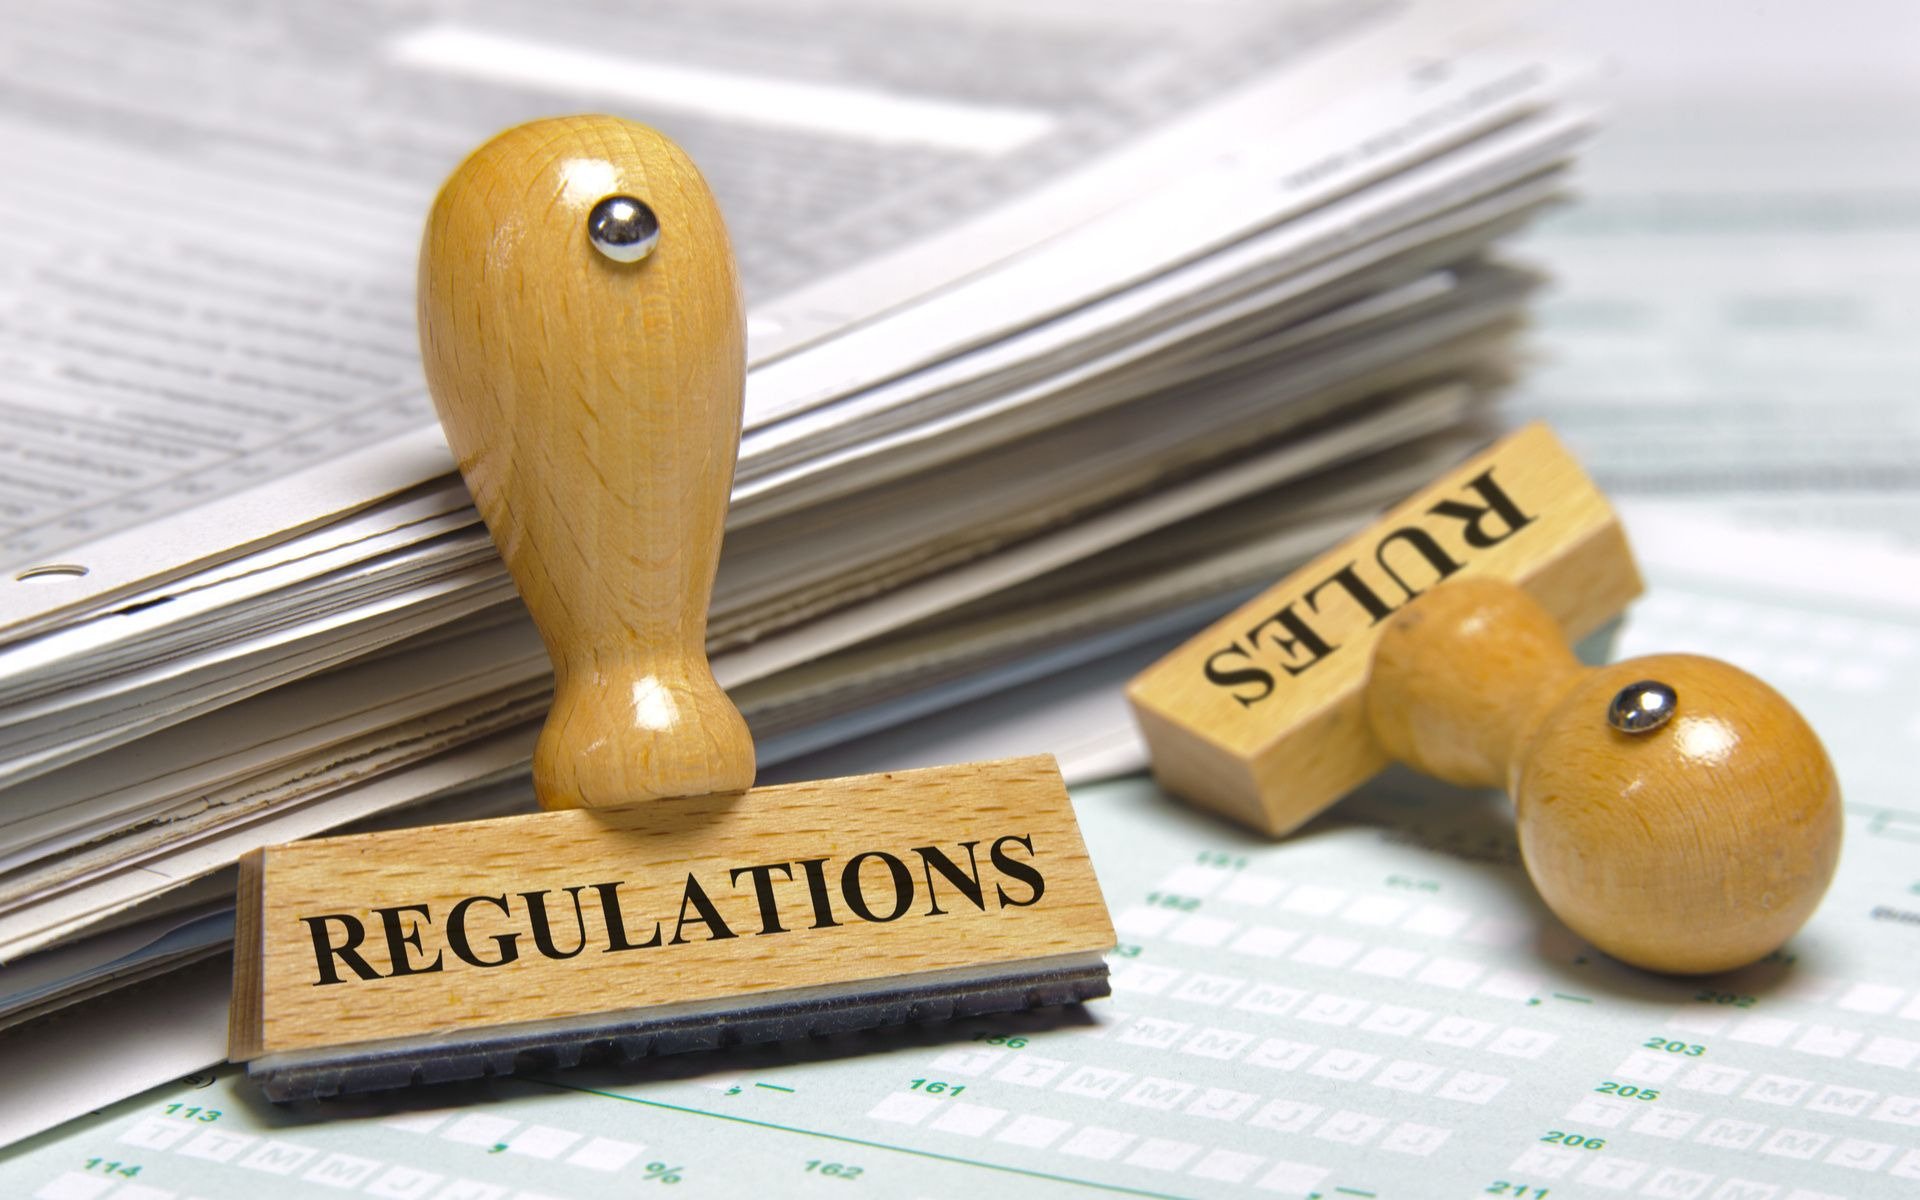 Bitcoin, Crypto Assets and Libra Attracting Strict Regulatory Scrutiny